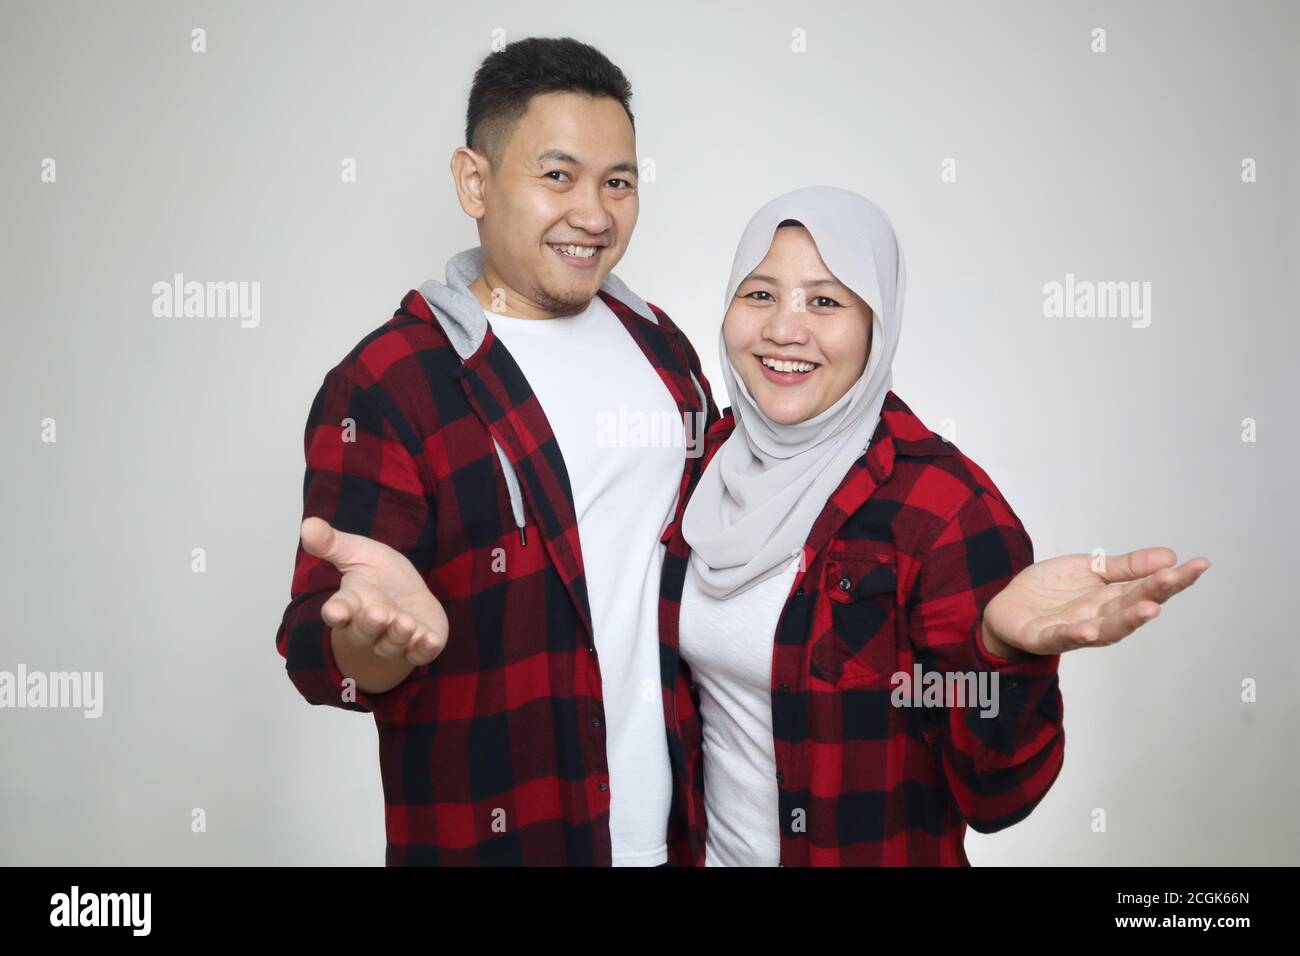 Beautiful happy Asian muslim couple wearing casual clothes smiling friendly offering handshake as greeting and welcoming Stock Photo